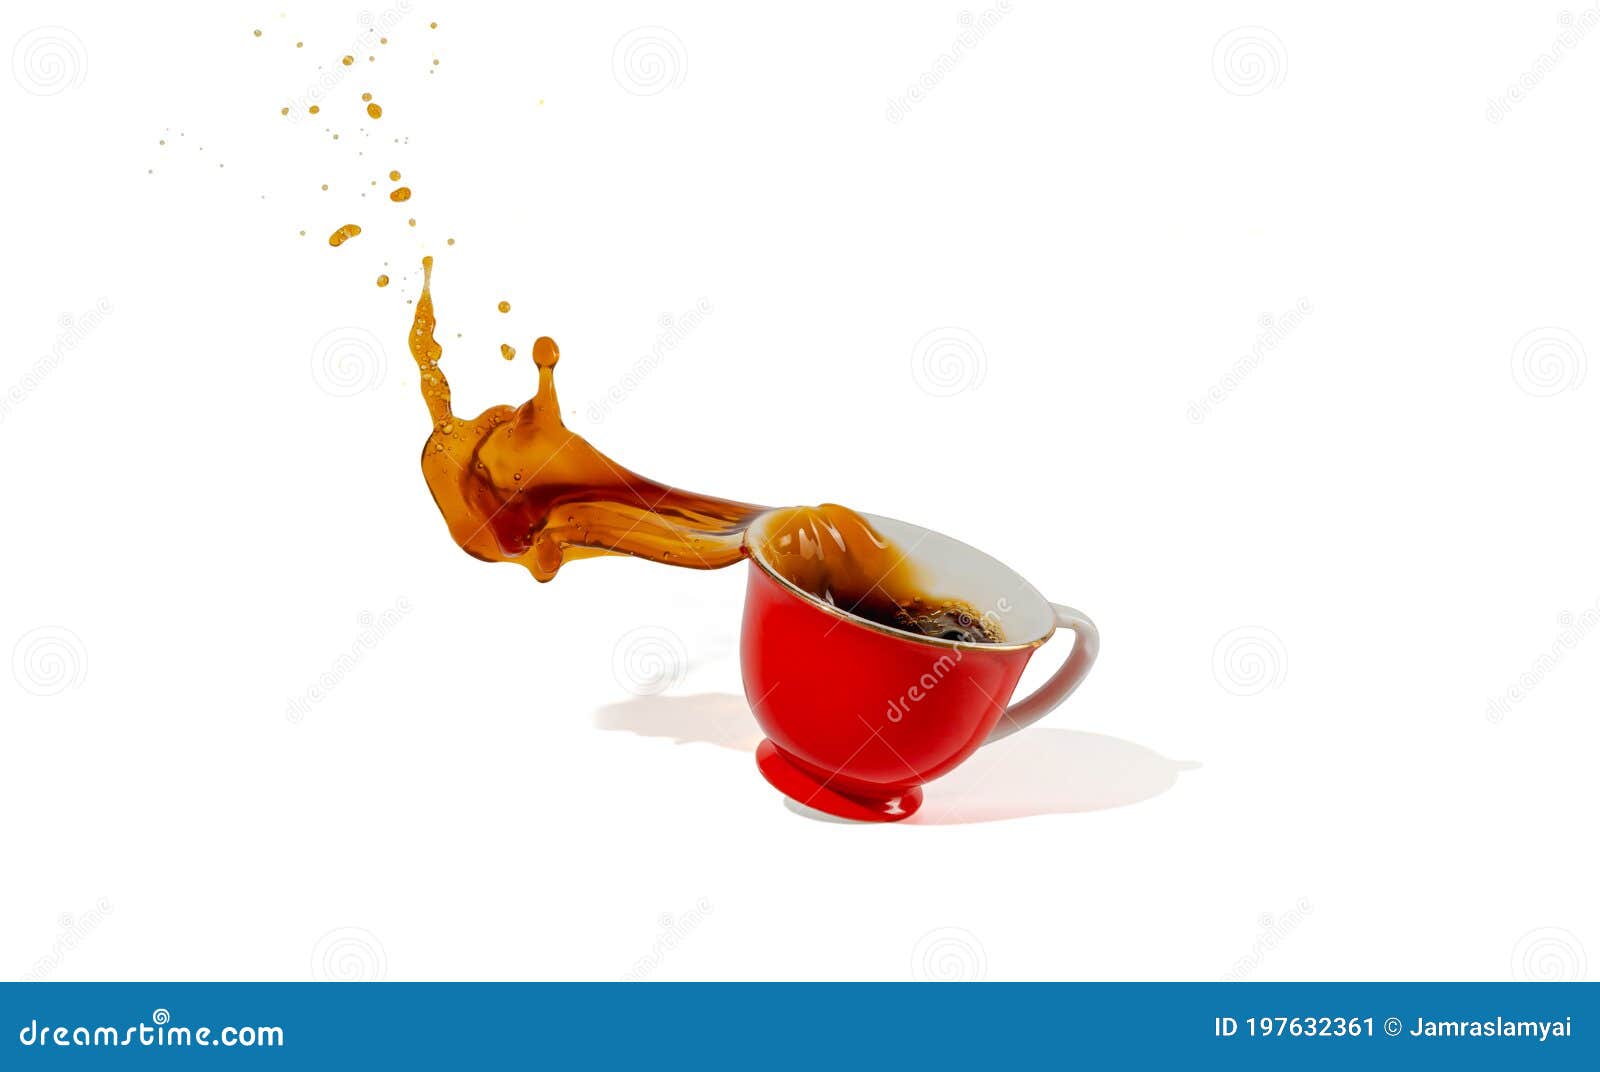 hot coffee red cup spilling and coffee water splash  on white background with shadow